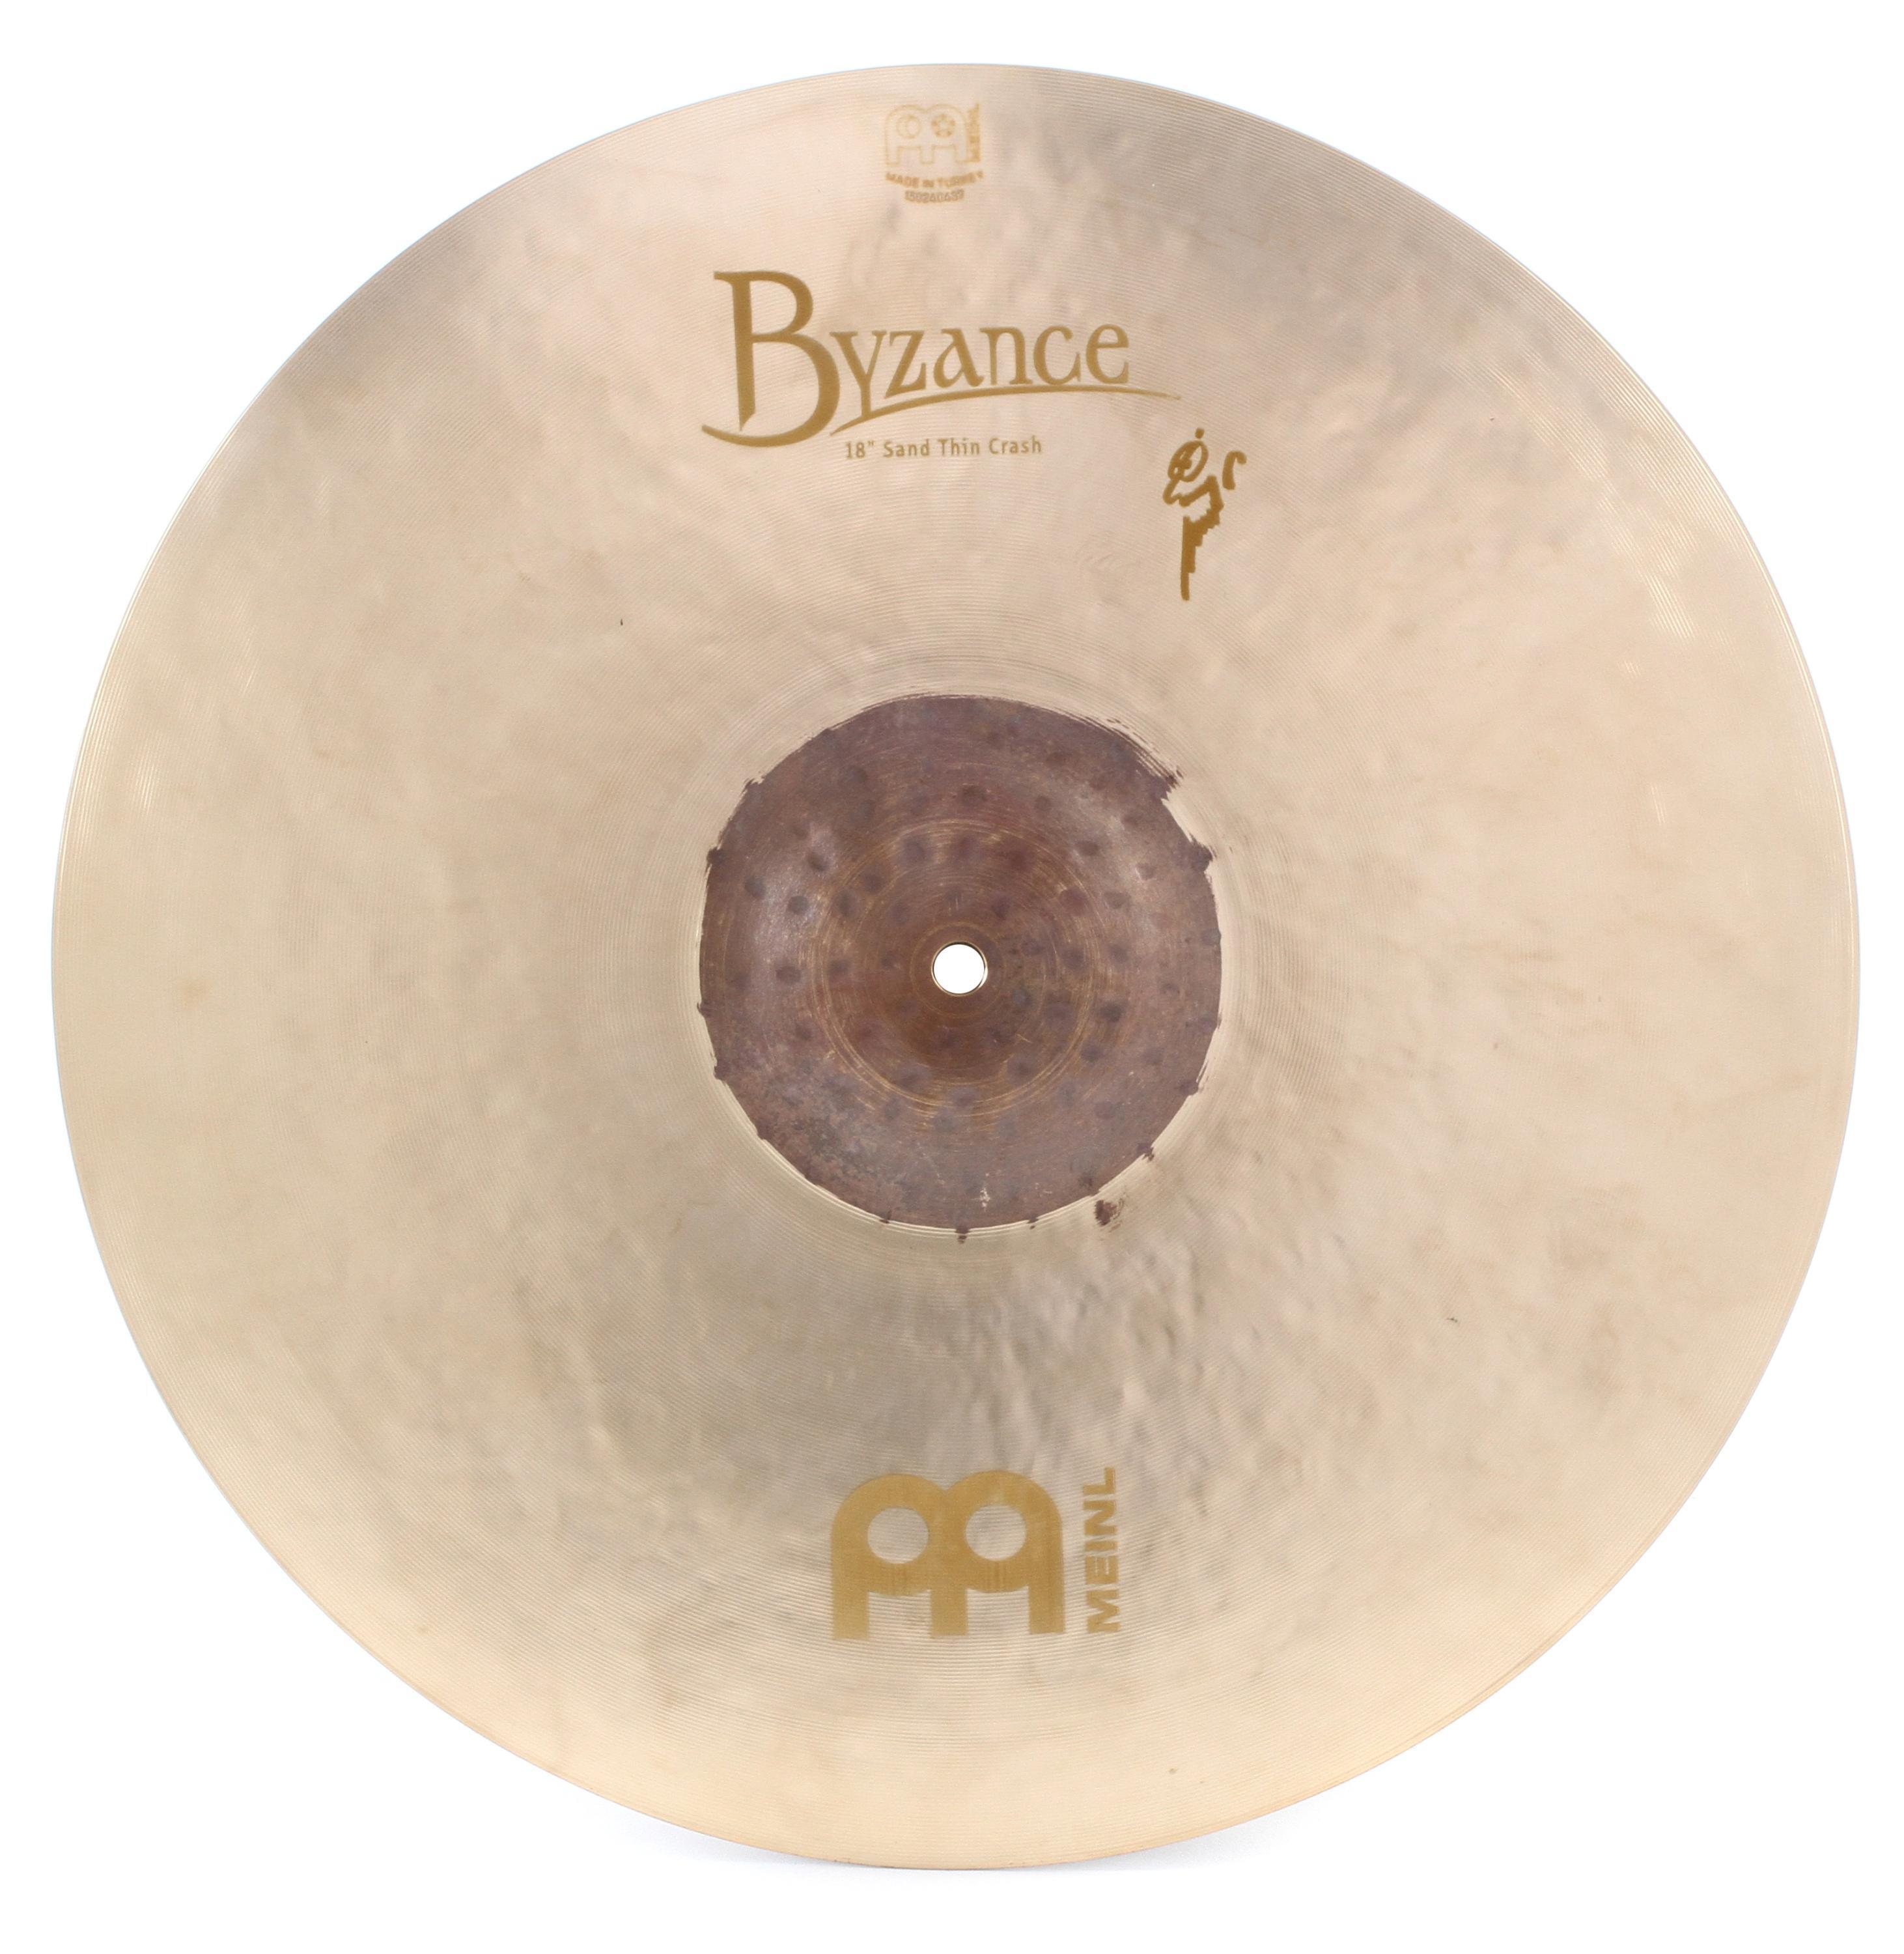 Meinl Cymbals Byzance Matched Crash Pack - 16 inch Trash and 18 